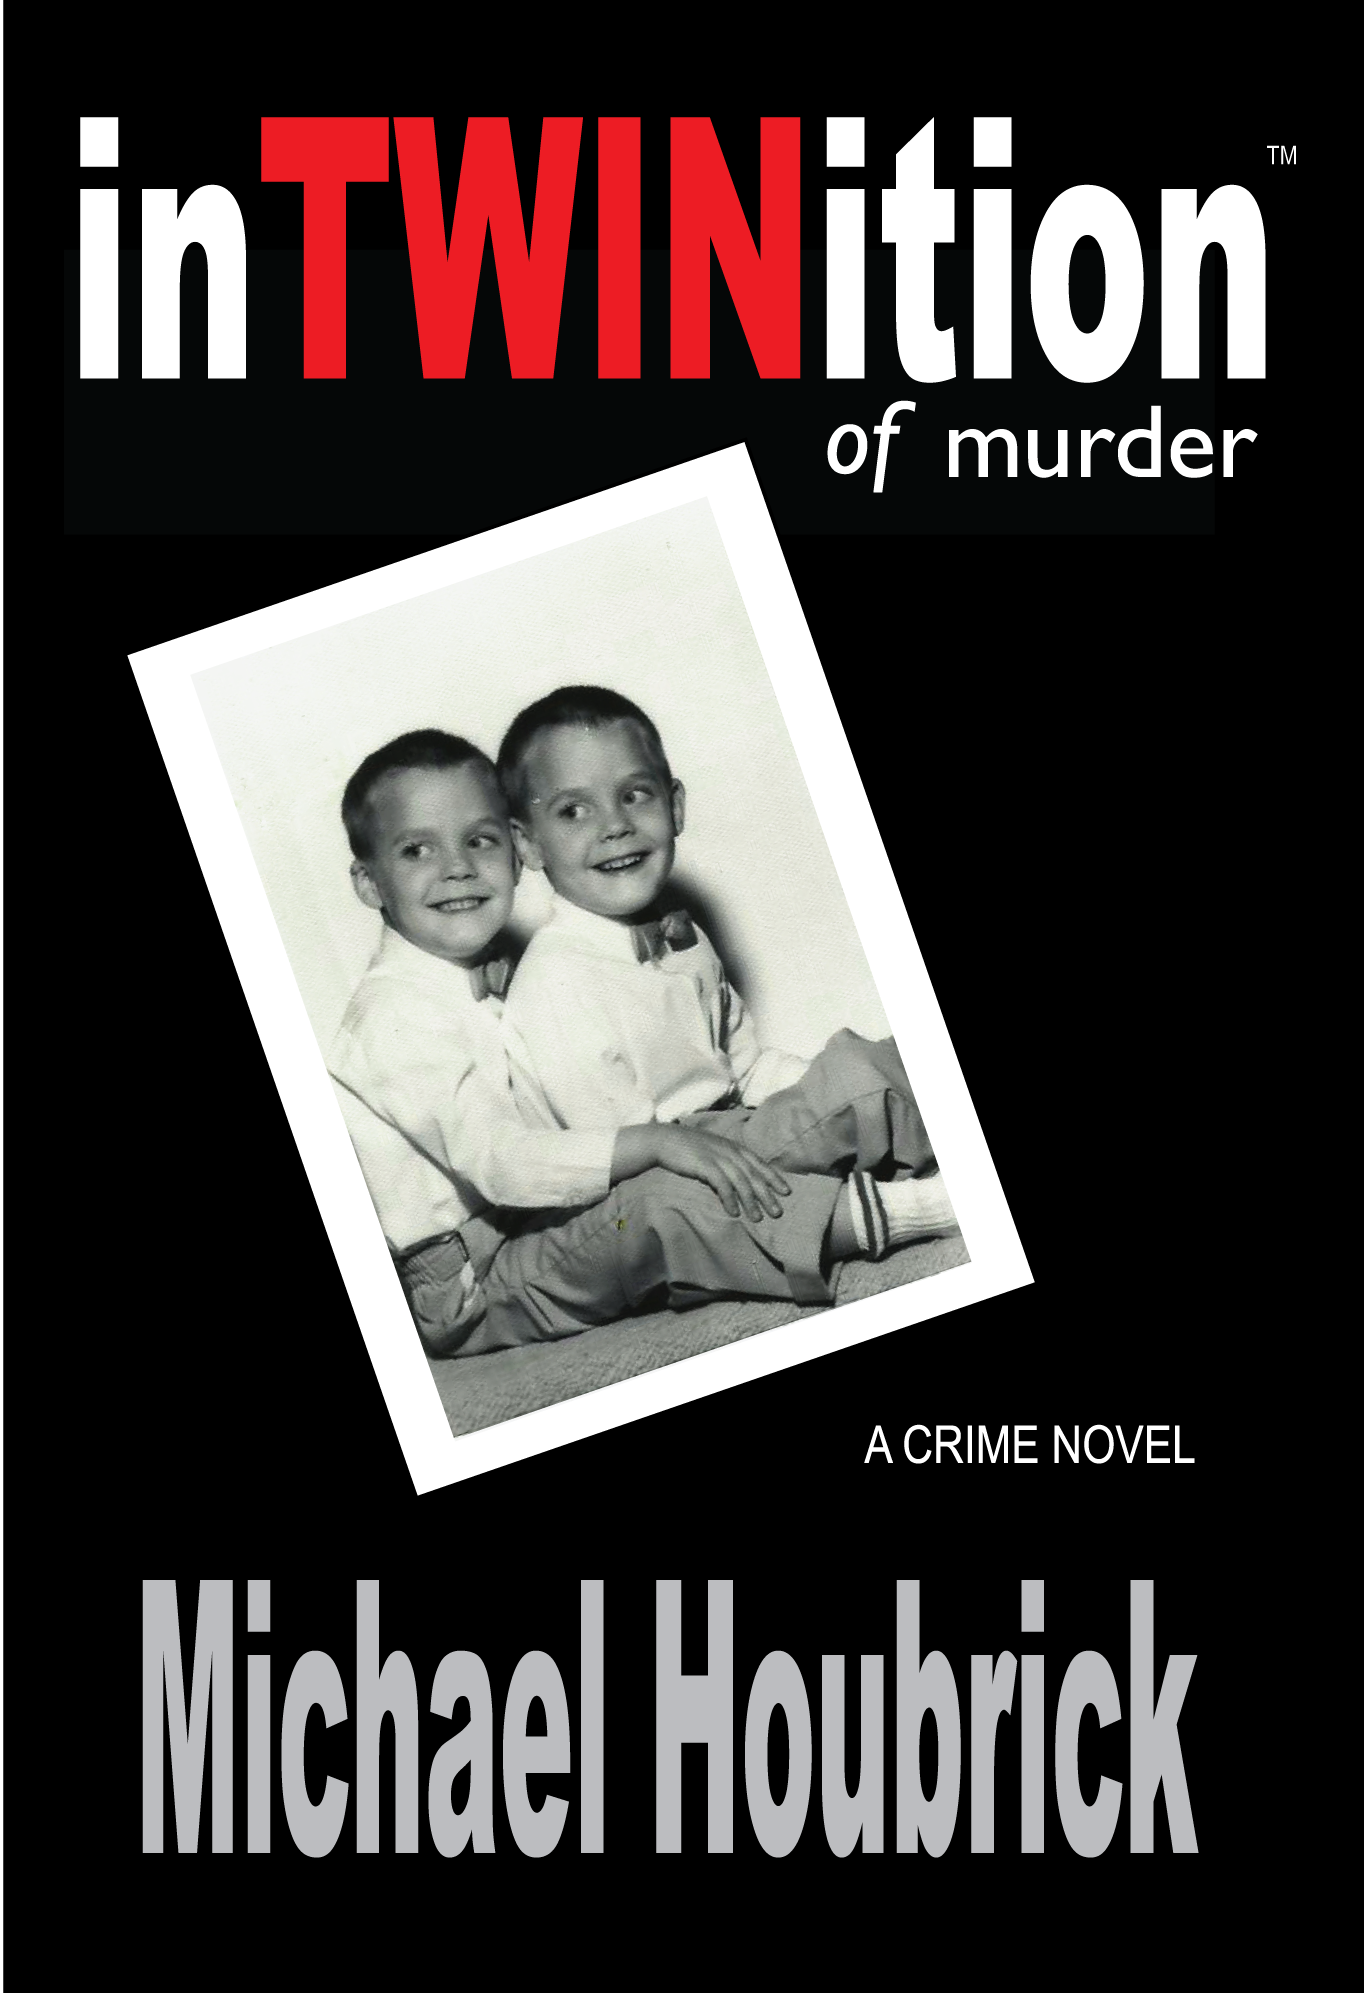 Mr. Brick Publishing released "inTWINition of murder" by Michael Houbrick